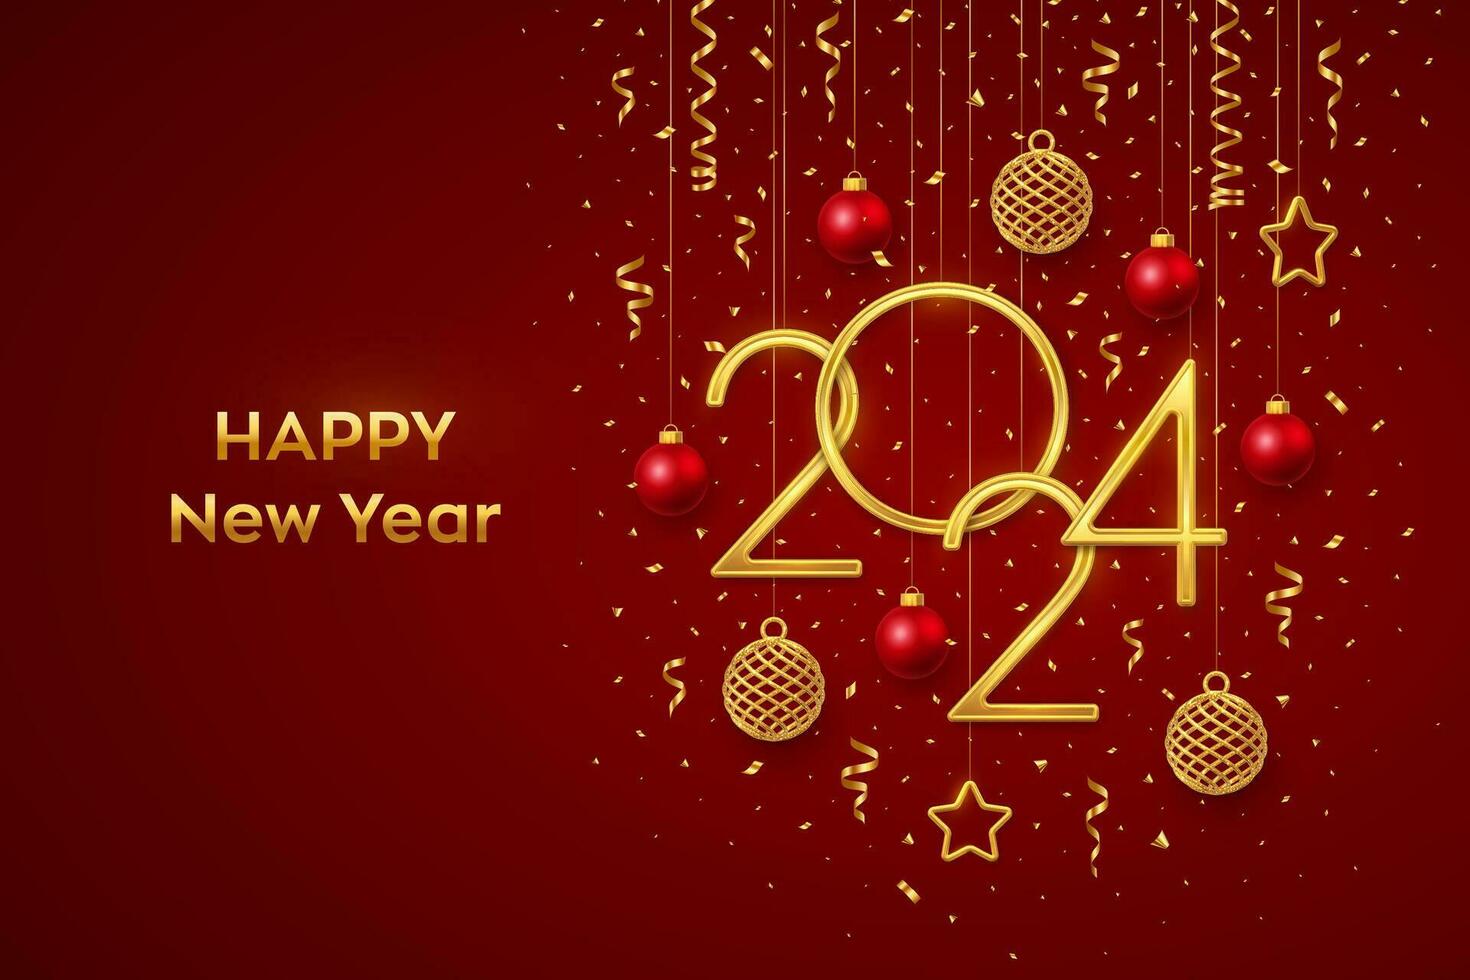 Happy New 2024 Year. Hanging Golden metallic numbers 2024 with shining 3D metallic stars, balls and confetti on red background. New Year greeting card, banner template. Realistic Vector illustration.